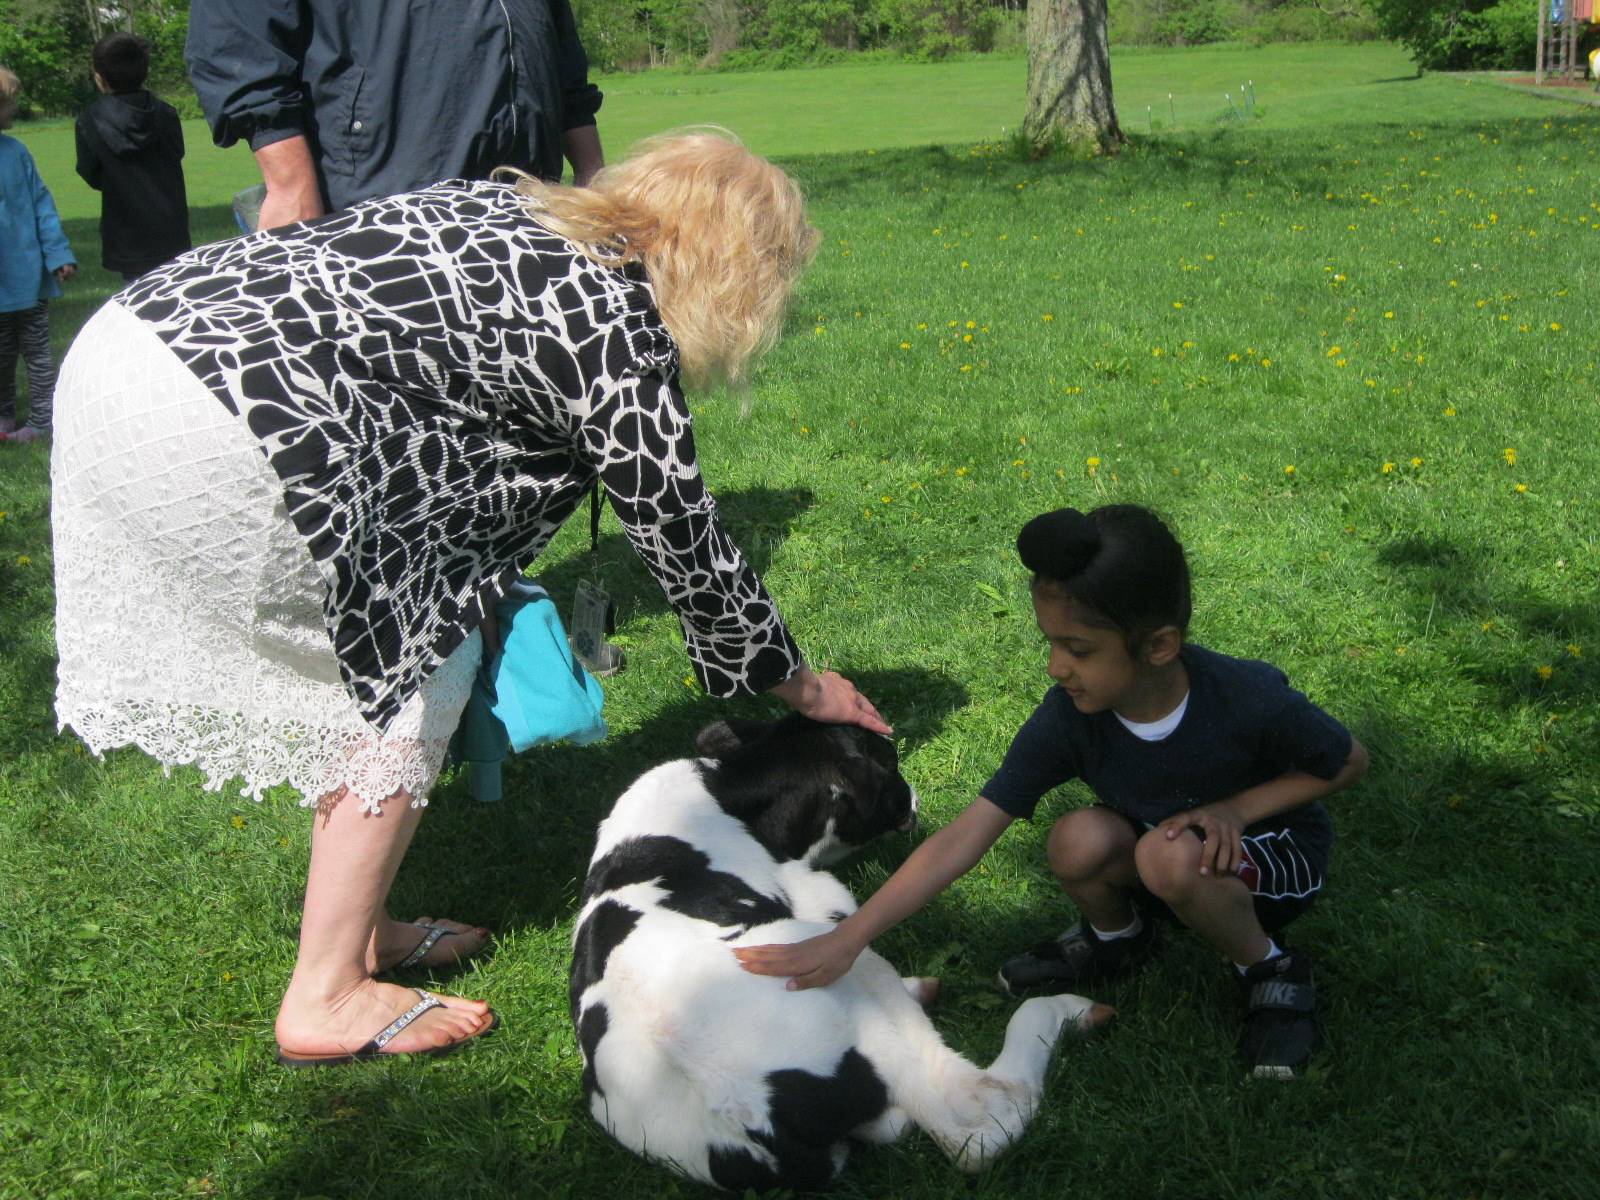 Student and staff member pet a calf.